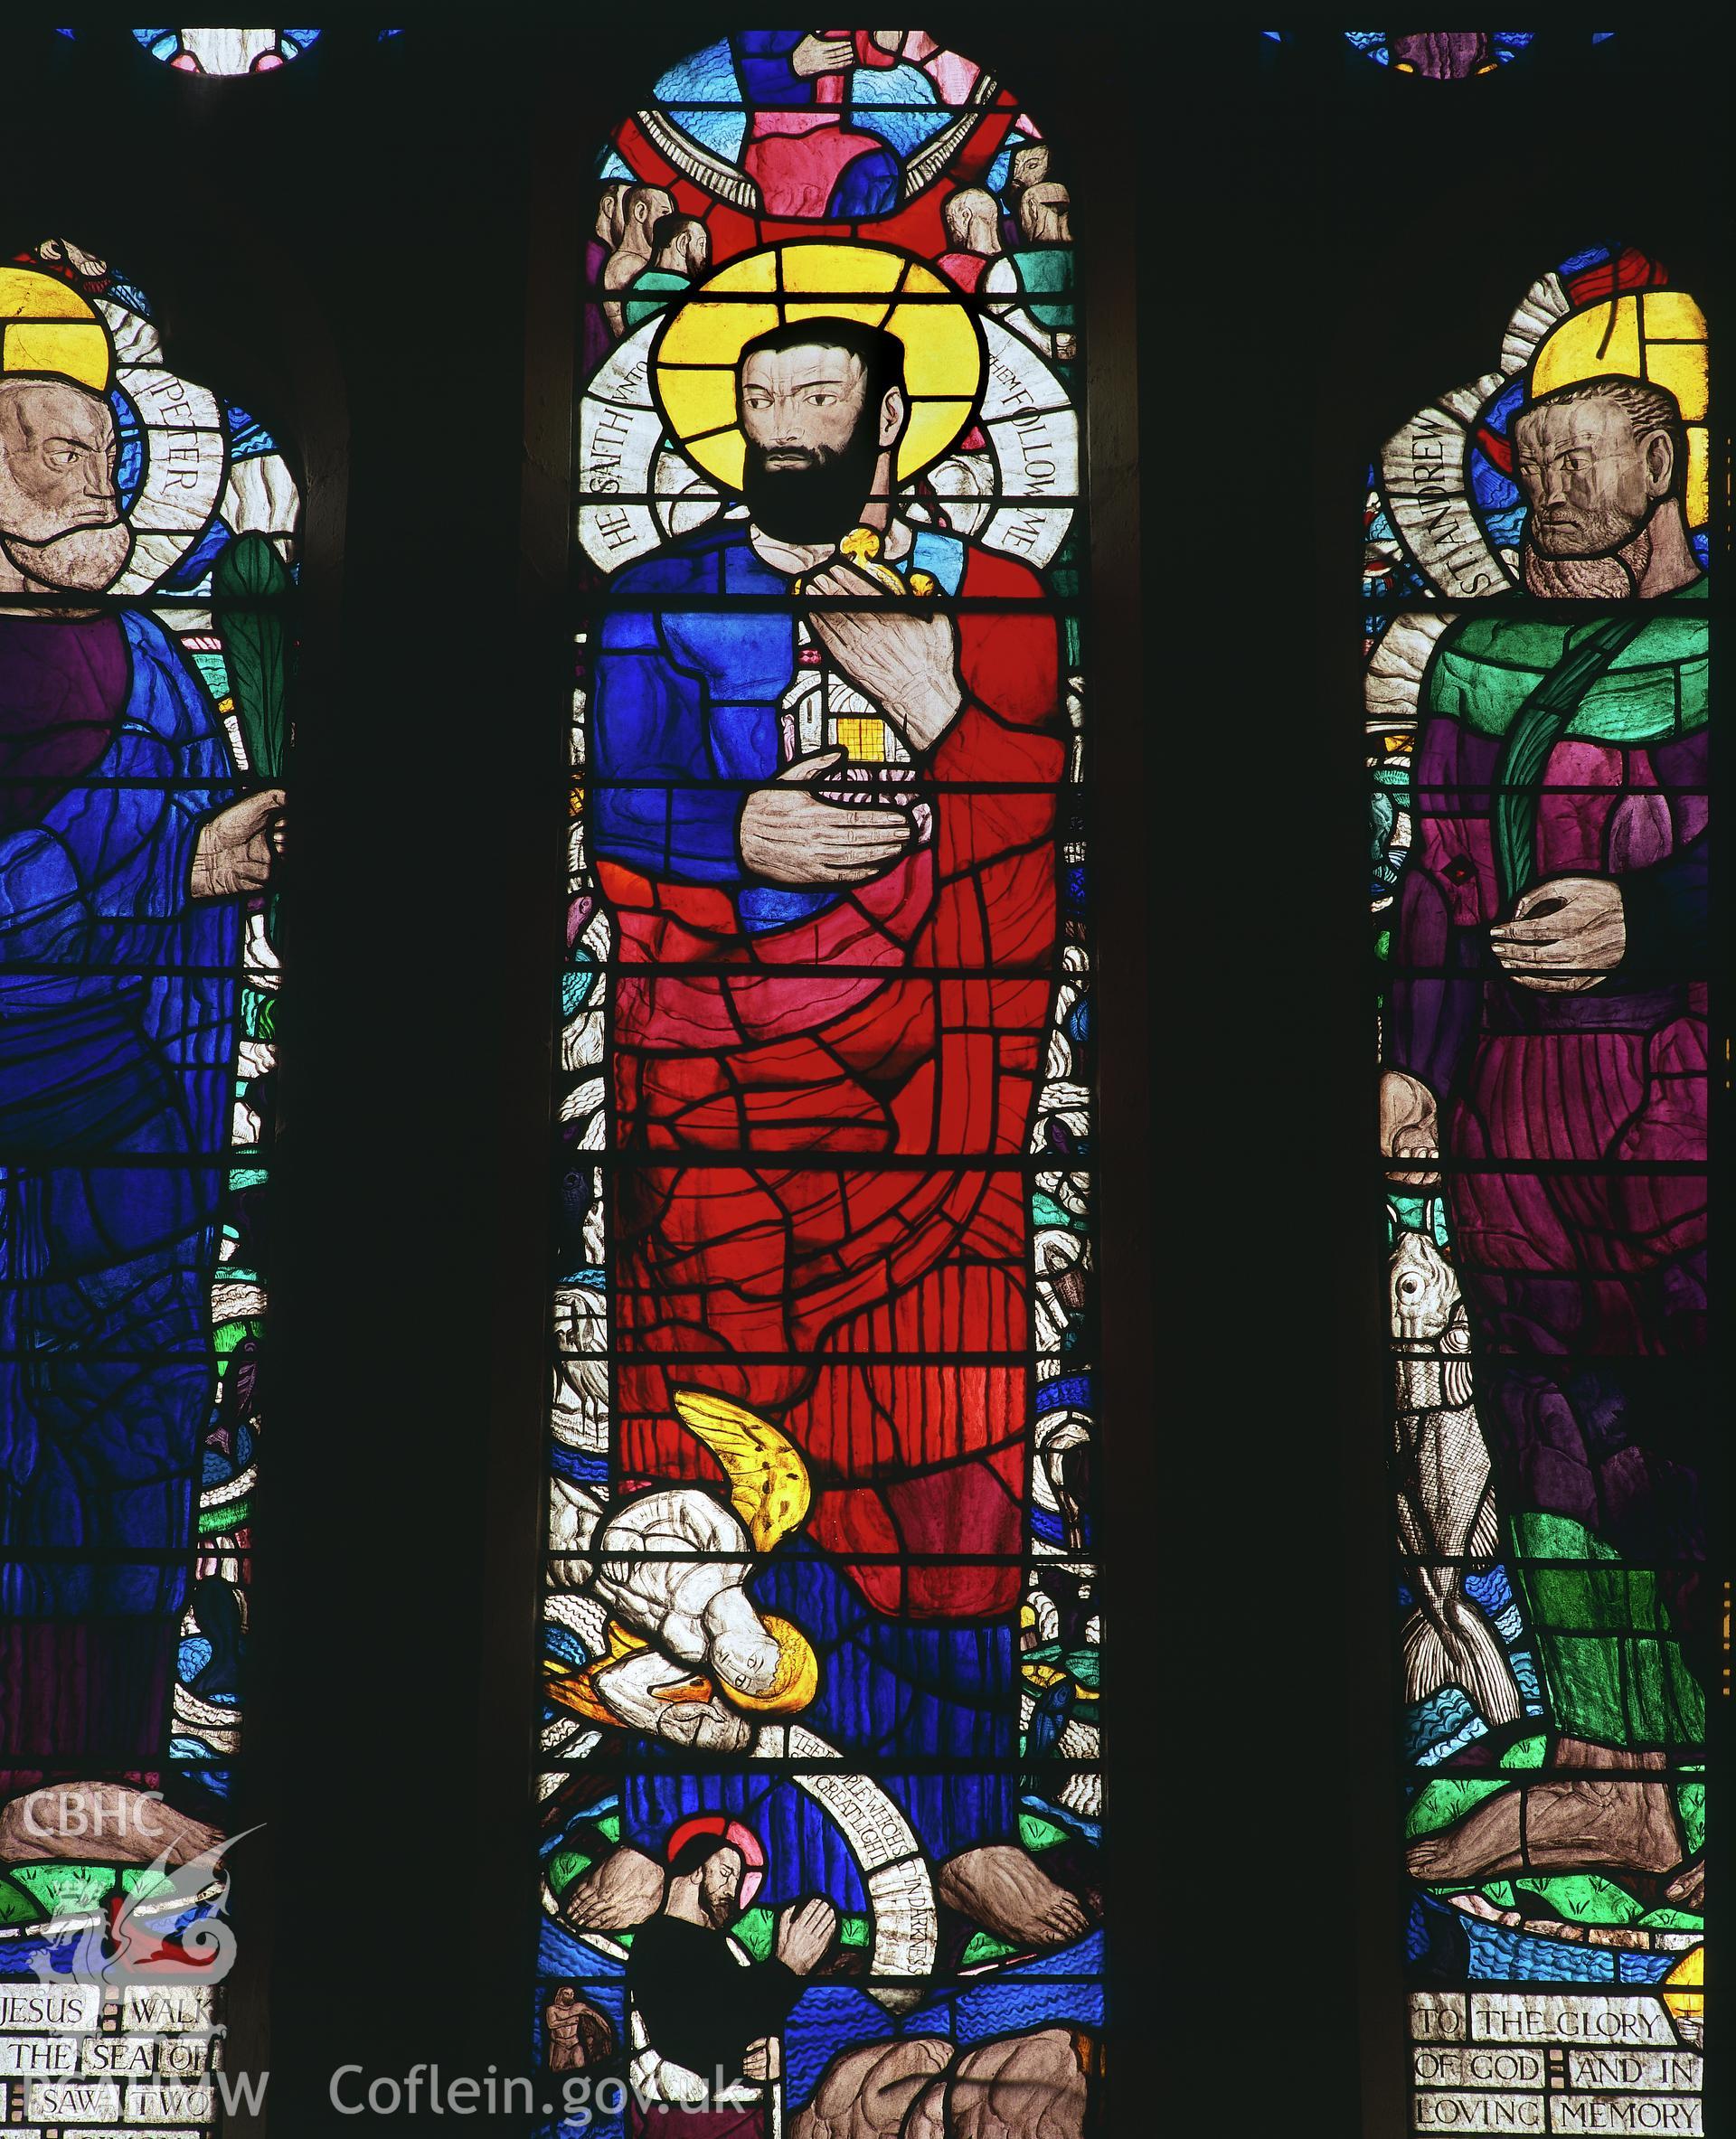 RCAHMW colour transparency showing view of  stained glass window at St Peter's Church, Lampeter